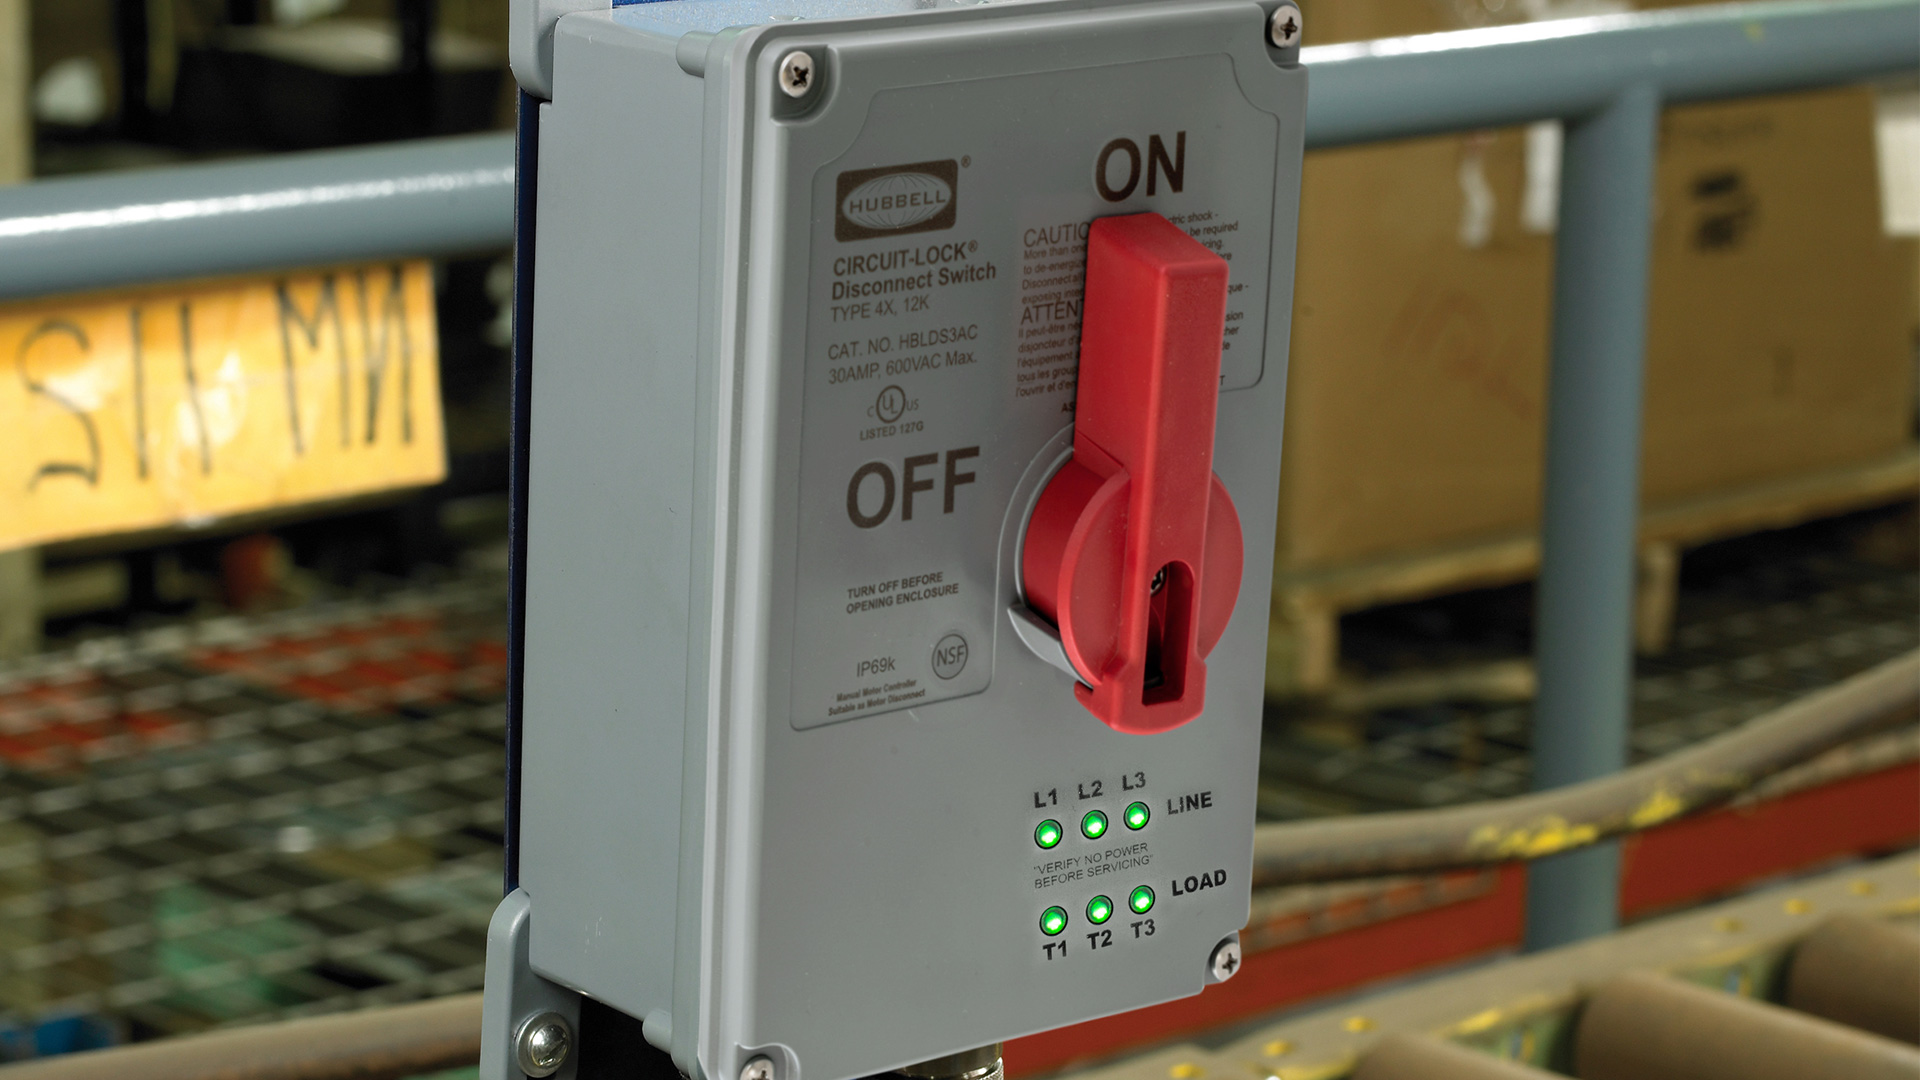 Check the electrical status of our Circuit-Lock® Disconnect Switches without removing the cover